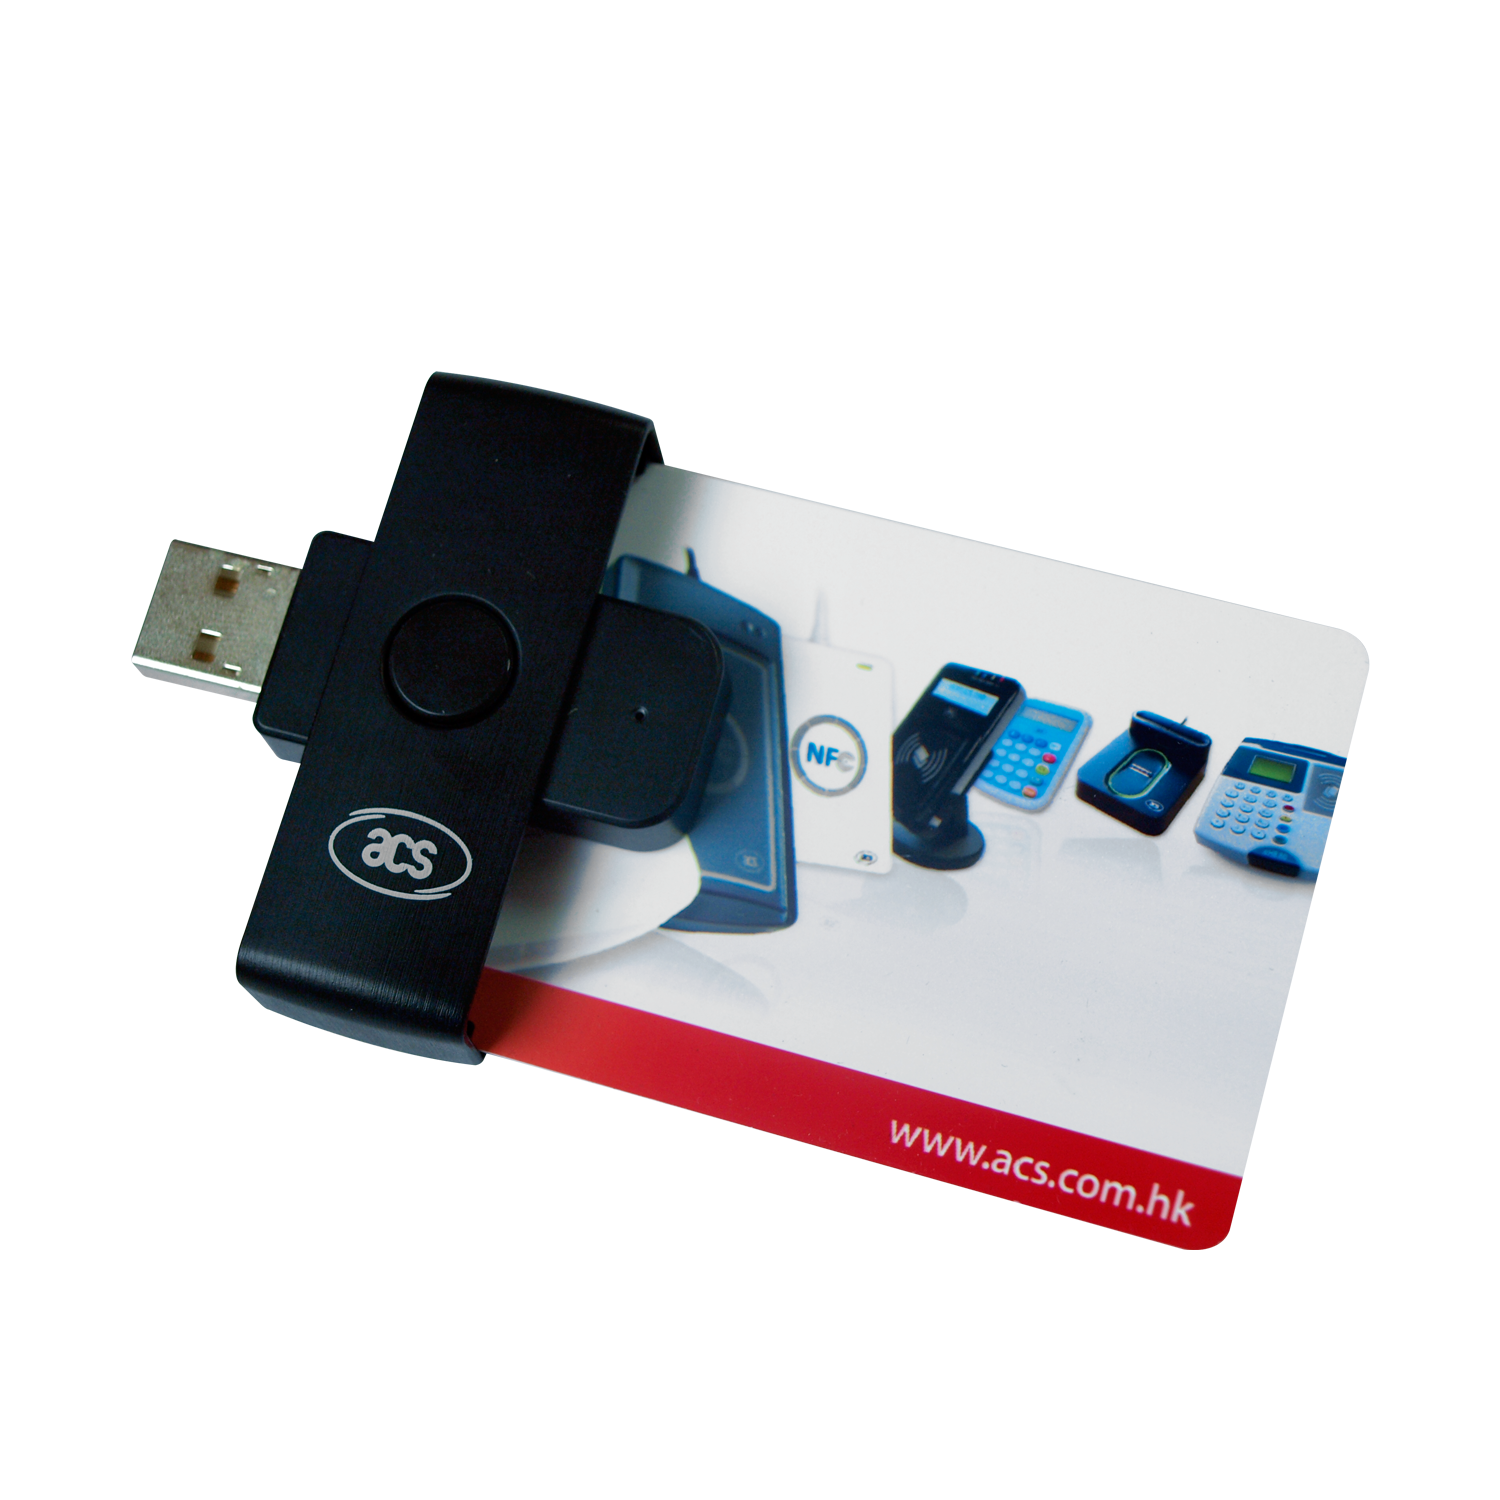 How To Get Piv Card Reader To Work For Mac